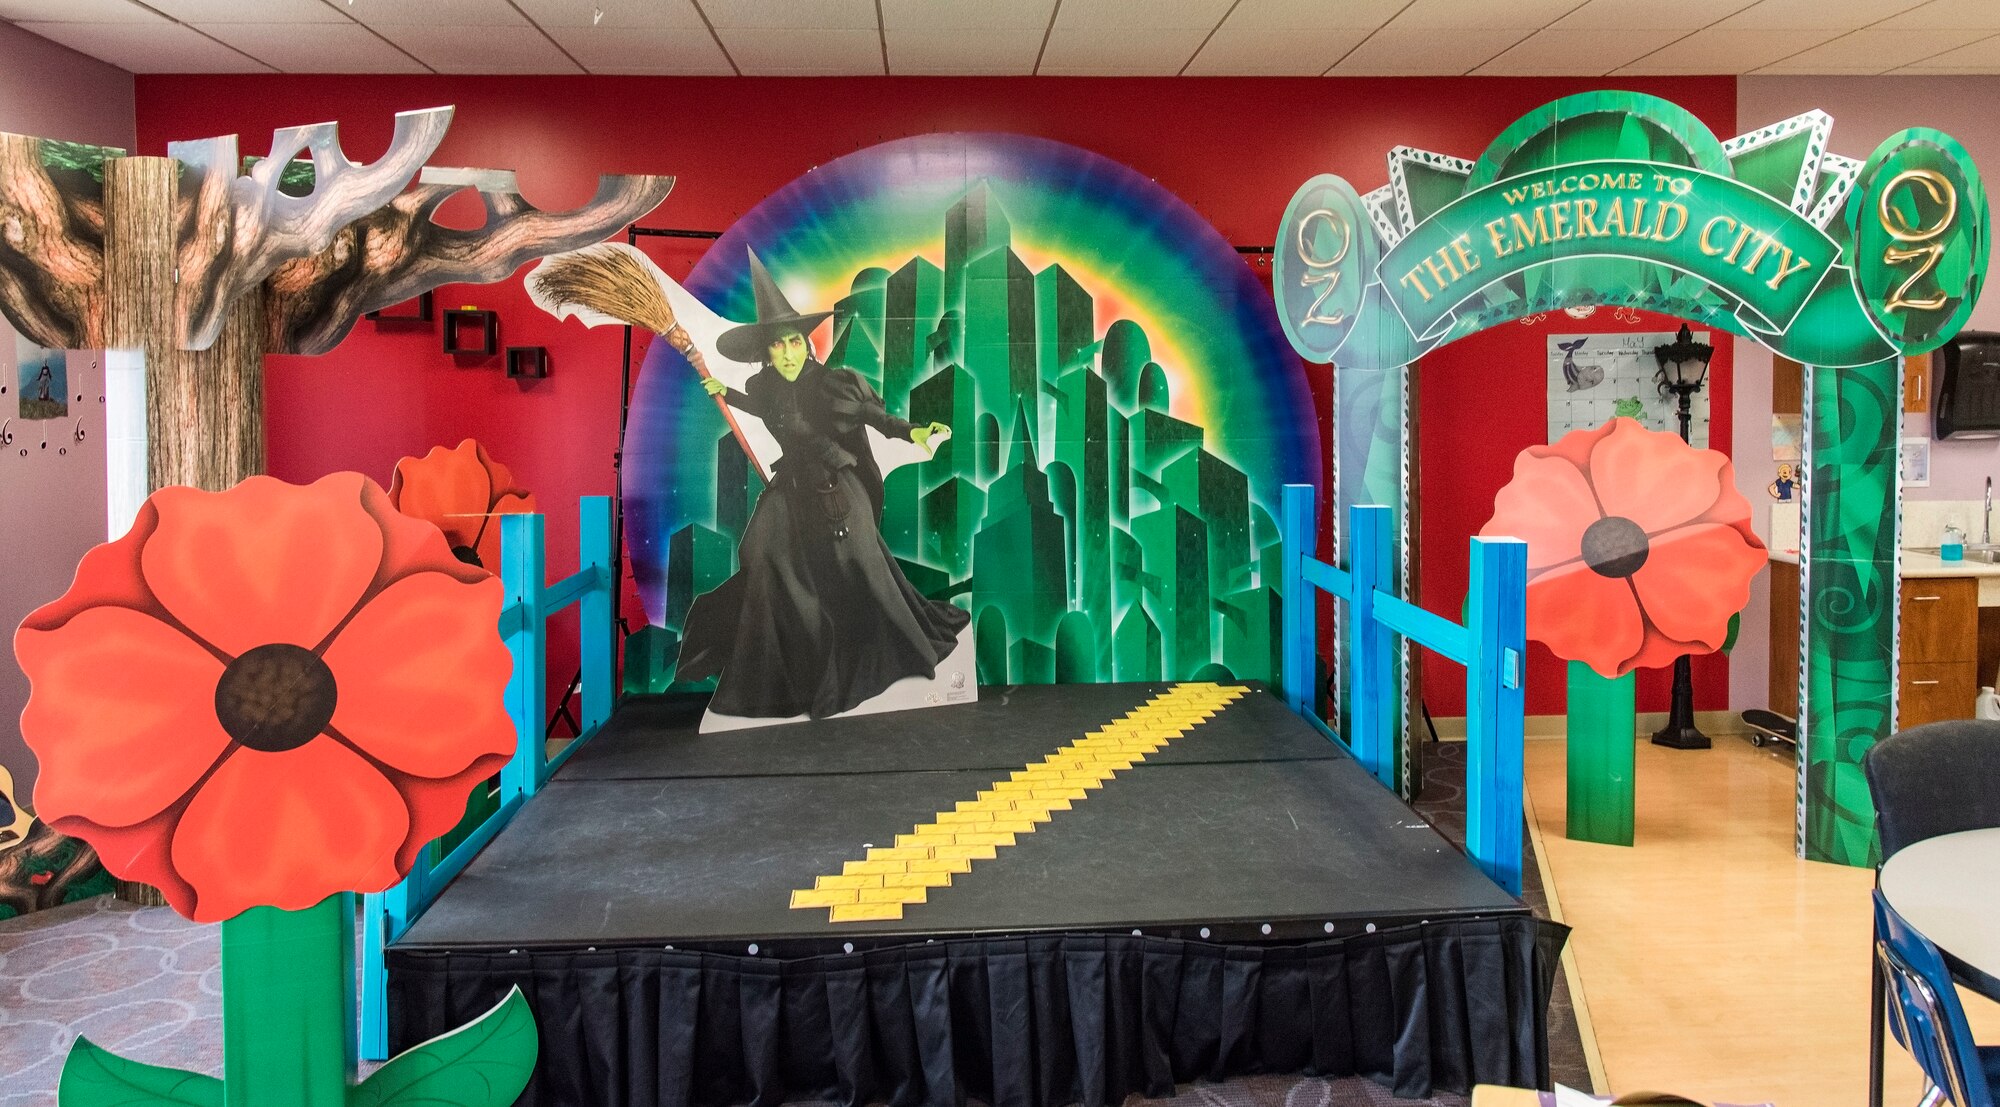 Backgrounds and props that will be used in the “The Wizard of Oz” play are kept and worked on in the Drama room, May 14, 2018, at the Youth Center on Dover Air Force Base, Del. Children enrolled in the Before and After School Age program hold practice in this room and are scheduled to perform the play on May 31. (U.S. Air Force photo by Roland Balik)